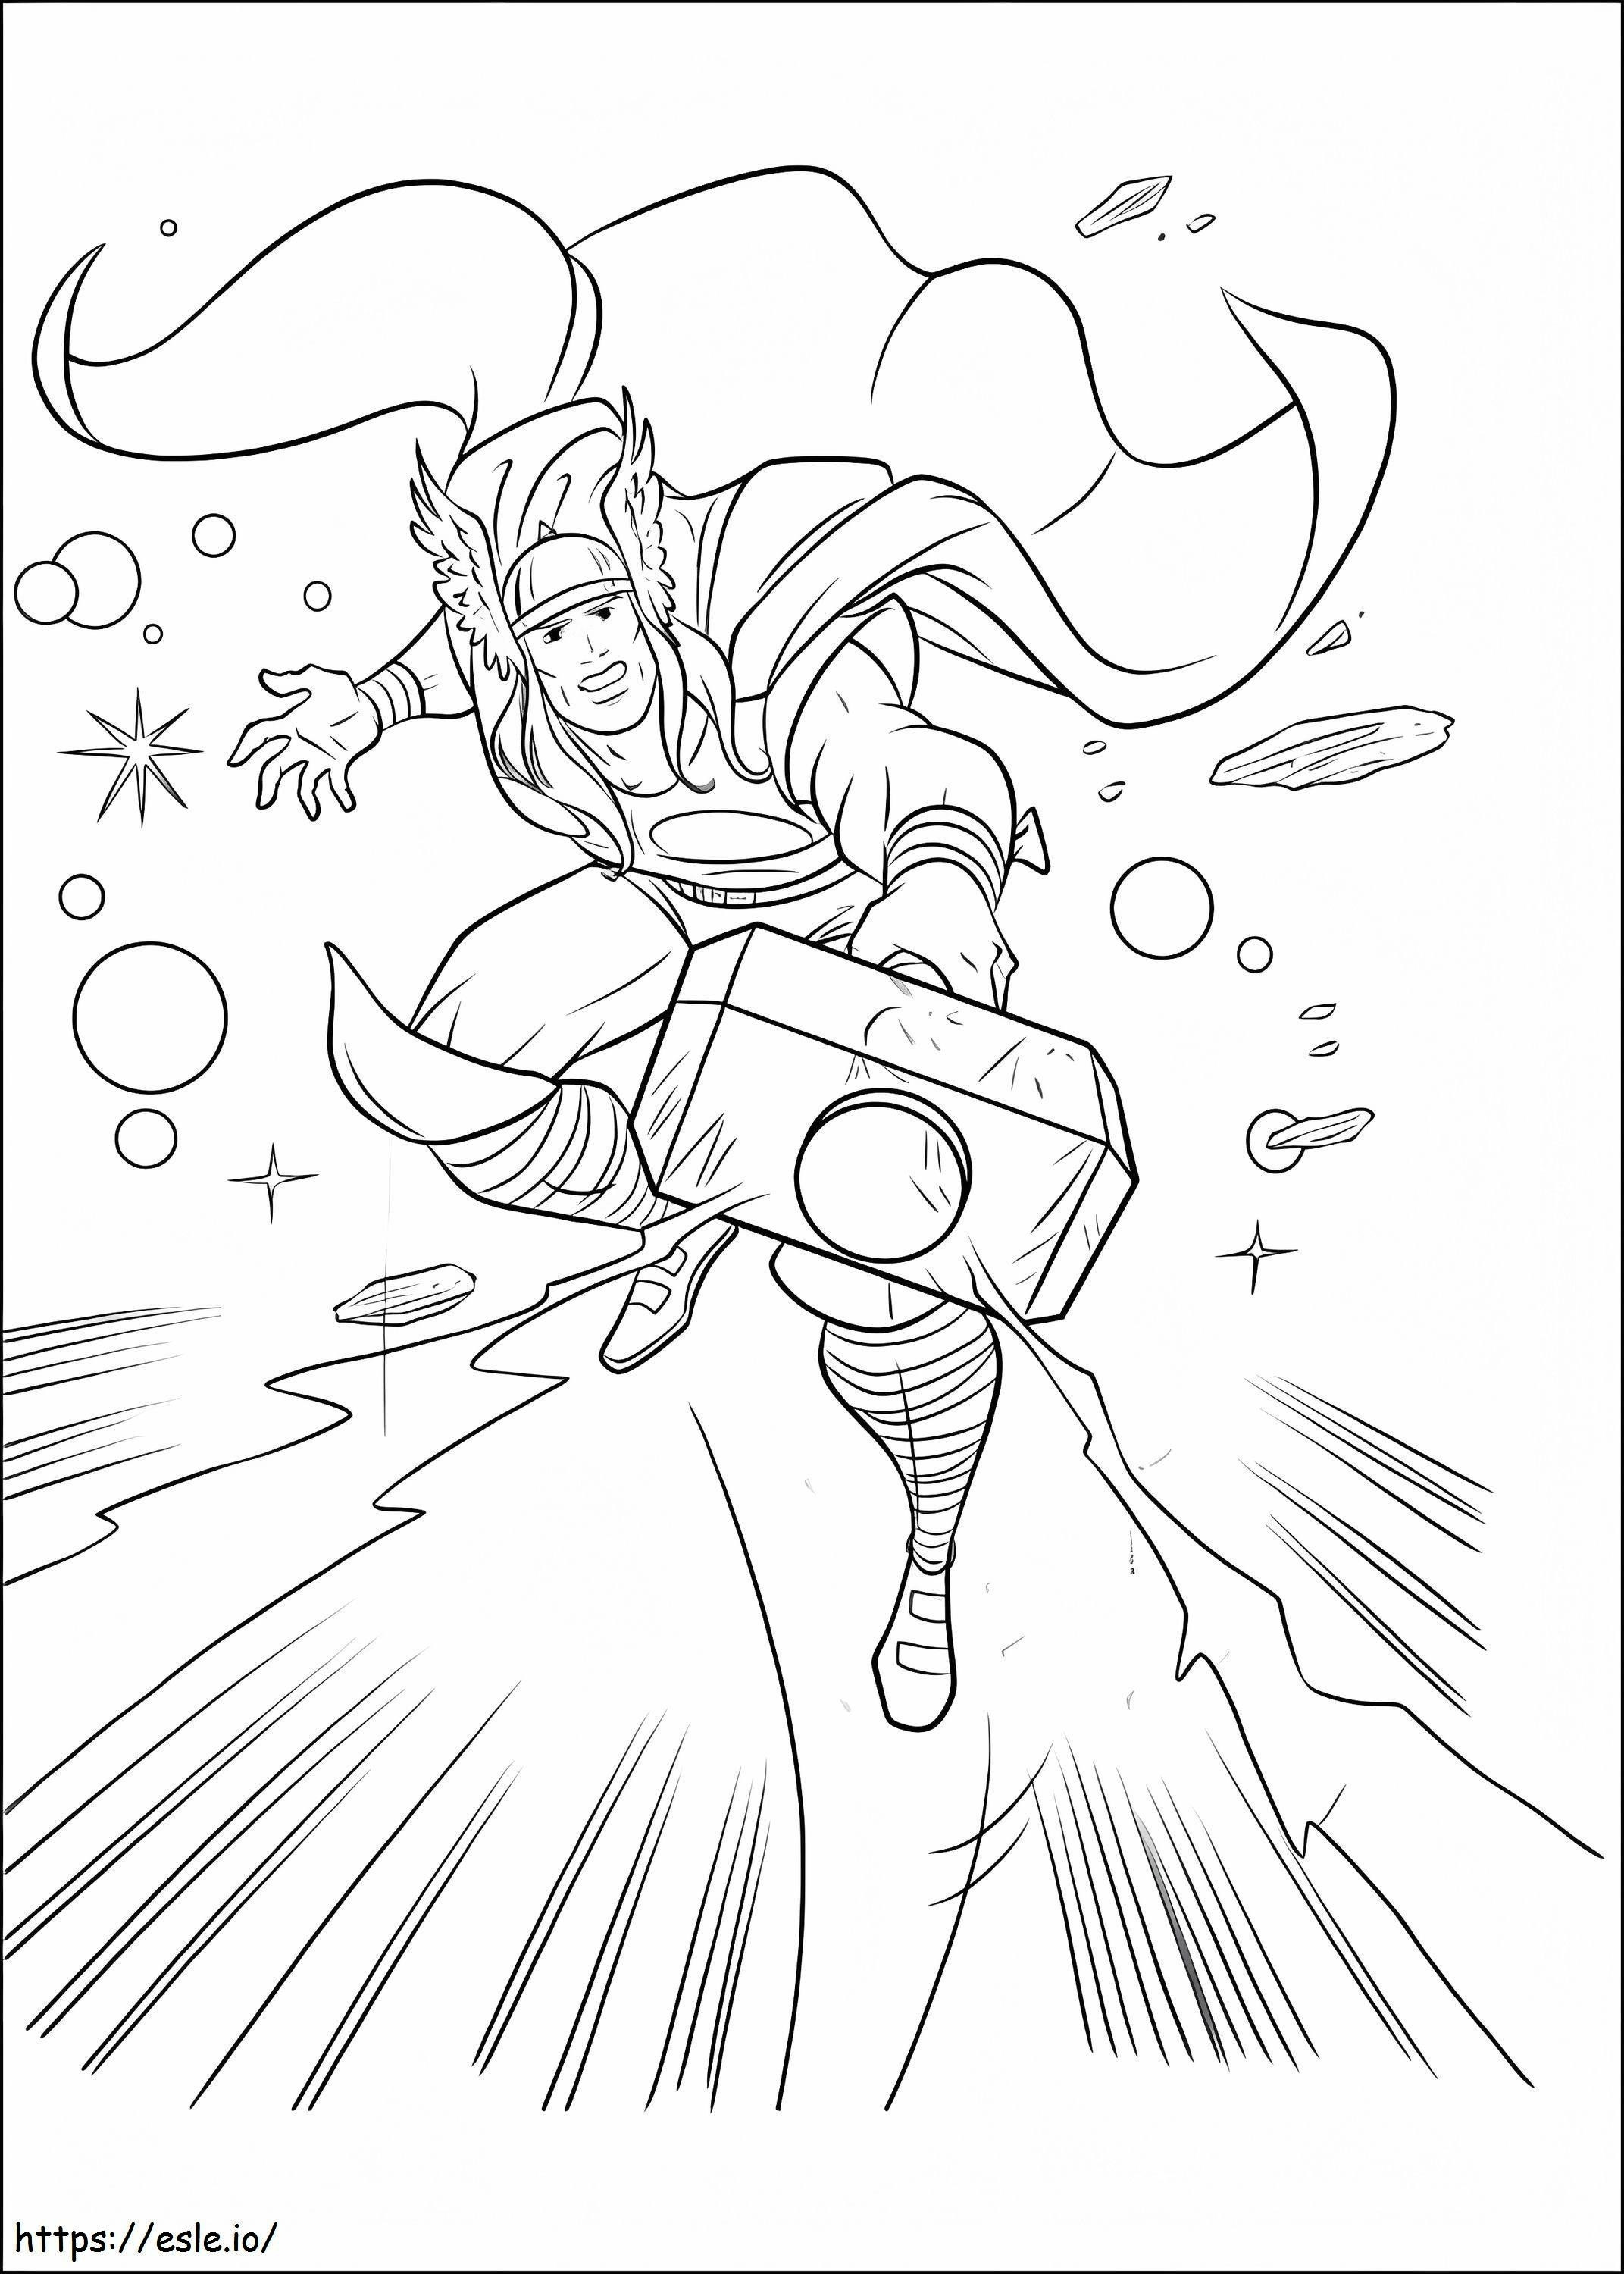 Cartoon Thor Attack coloring page